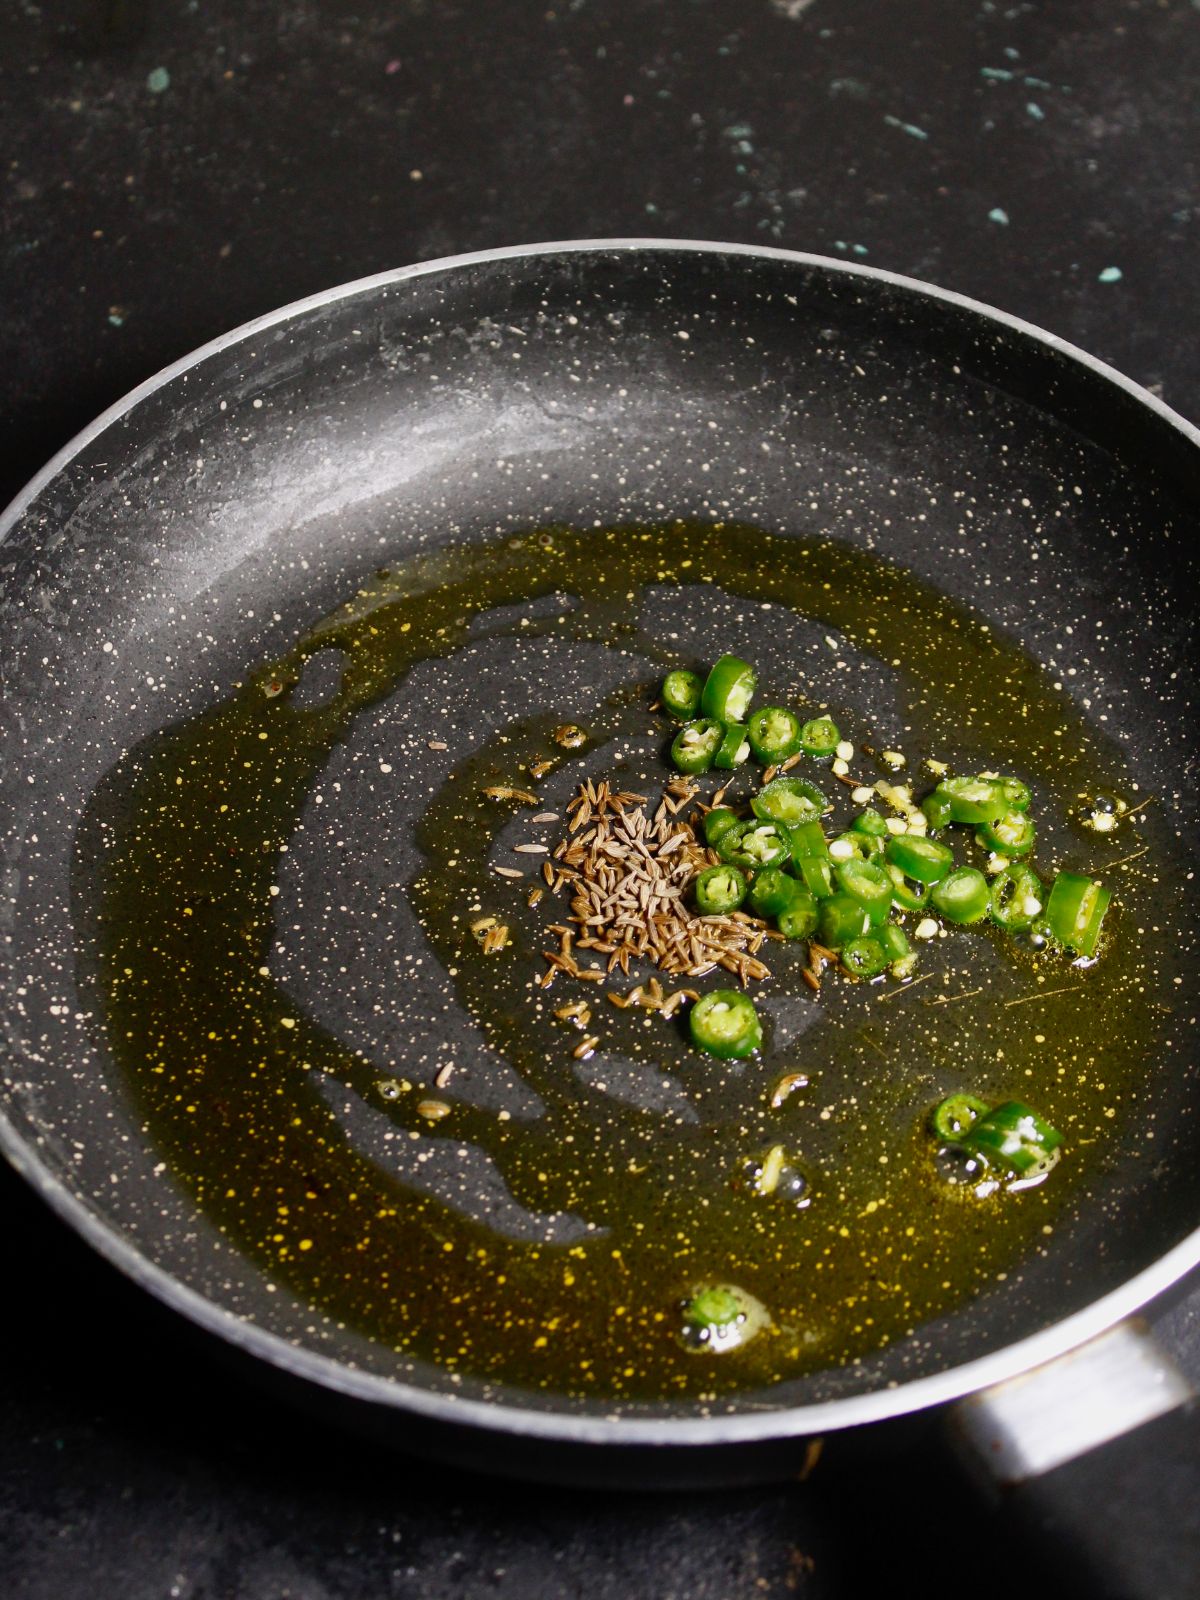 Take oil, cumin seeds and green chilies in a pan and saute 